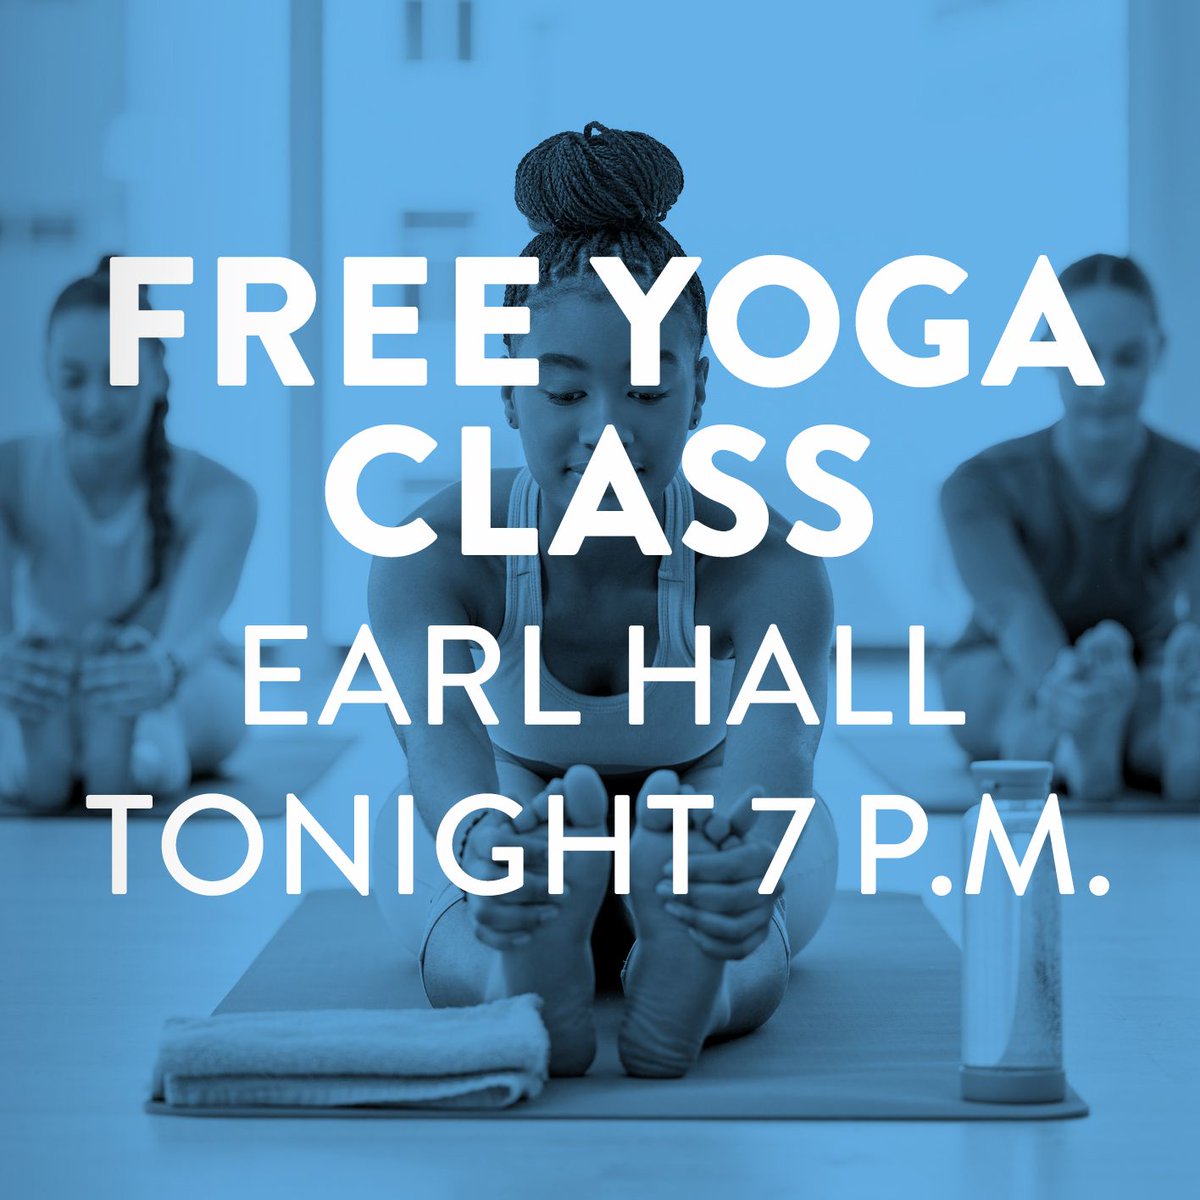 A free yoga class will be offered in the auditorium of Earl Hall tonight from 7–8 p.m. 🧘 #ColumbiaCollege1754 #Yoga #YogaClasses #Free